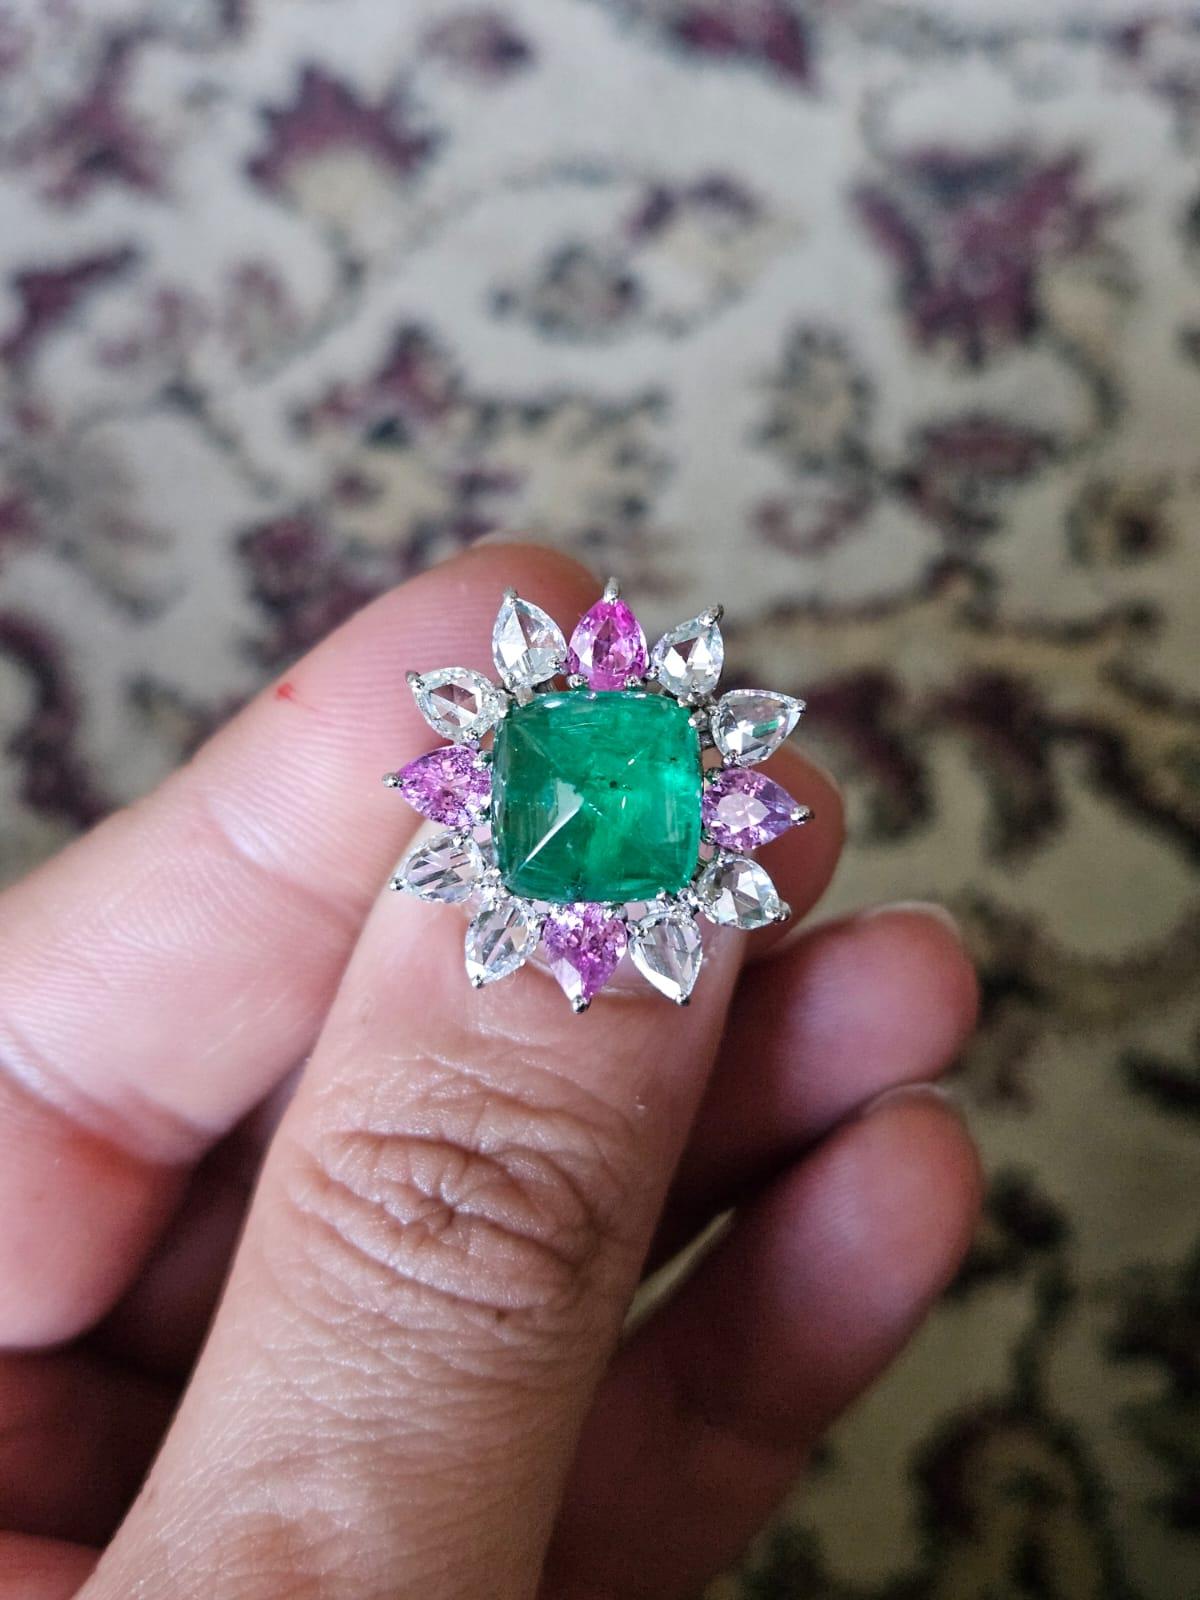 A very beautiful and gorgeous, Art deco style, Emerald & Pink Sapphire Cocktail Engagement Ring set in 18K White Gold & Diamonds. The weight of the Emerald Sugarloaf Cabochon is 4.82 carats. The Emerald is completely natural, without any treatment